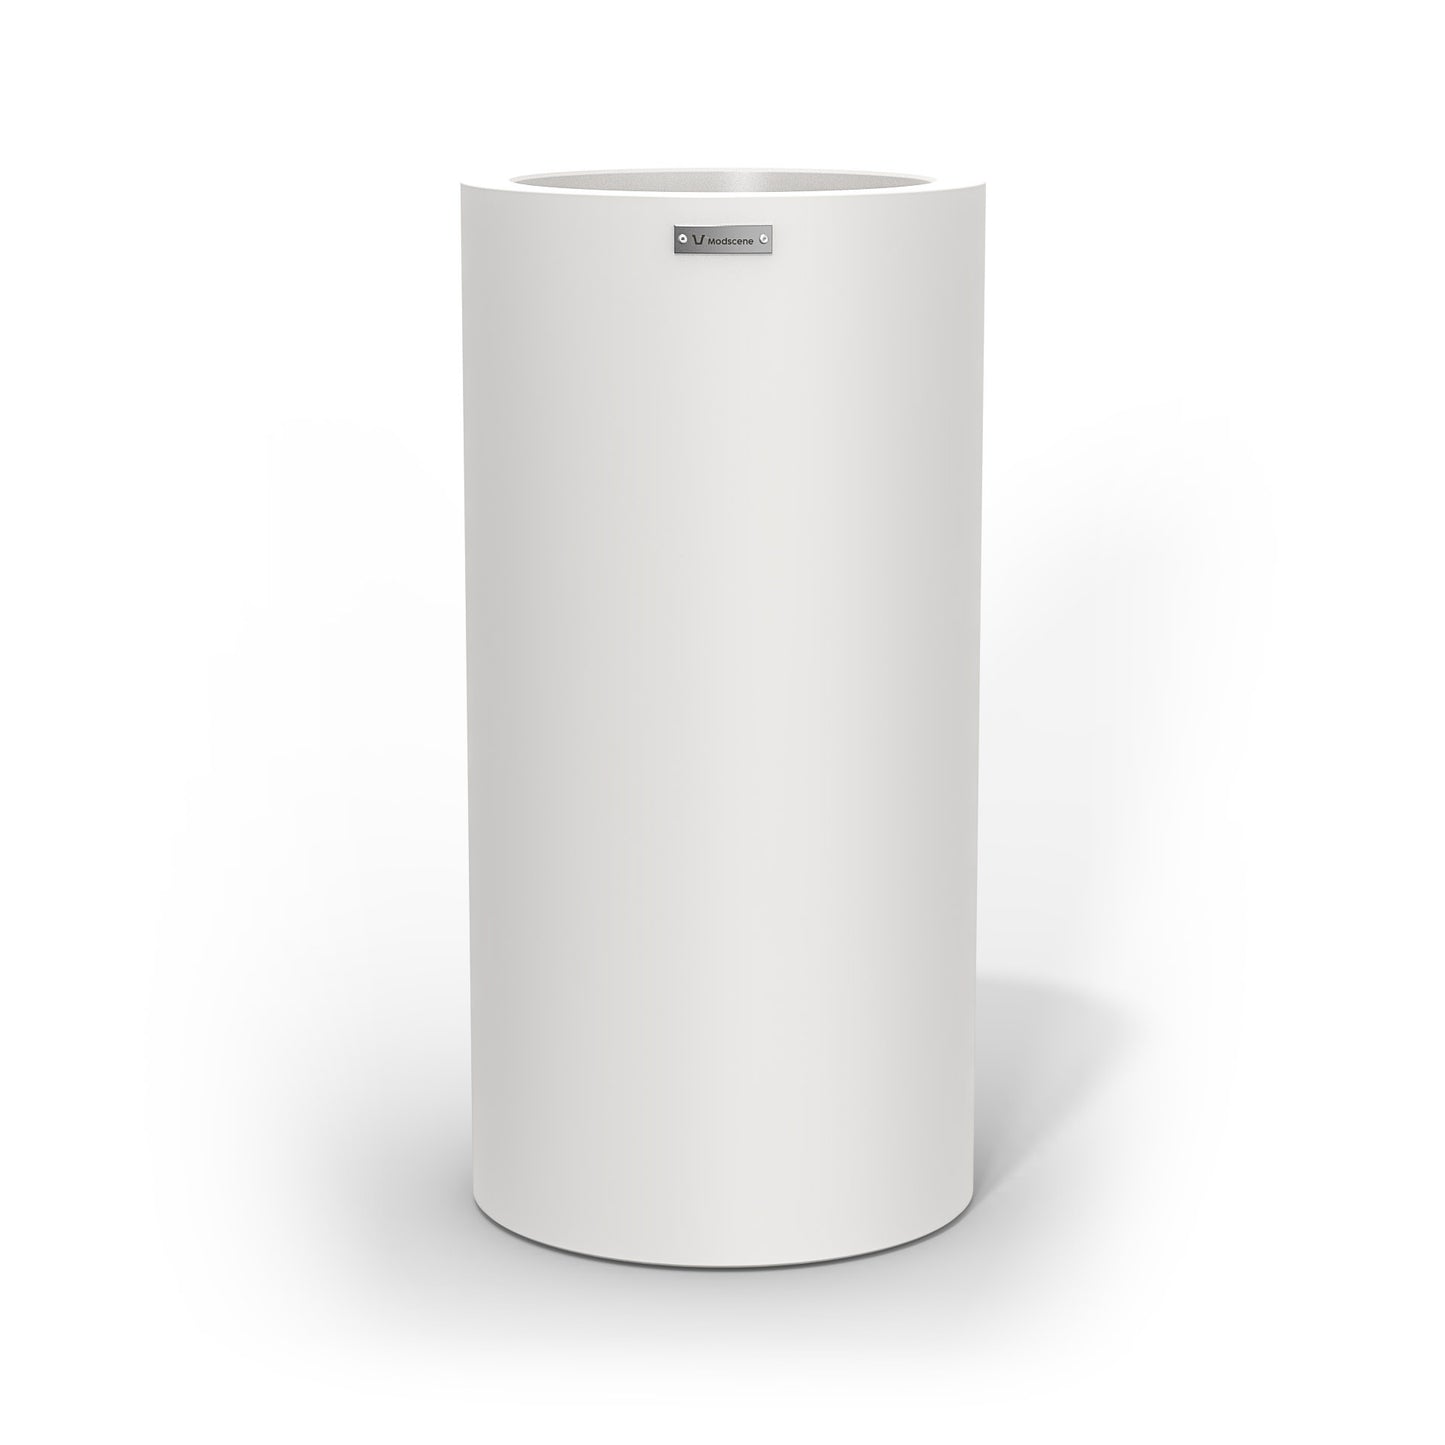 A large cigar cylinder pot planter in white.